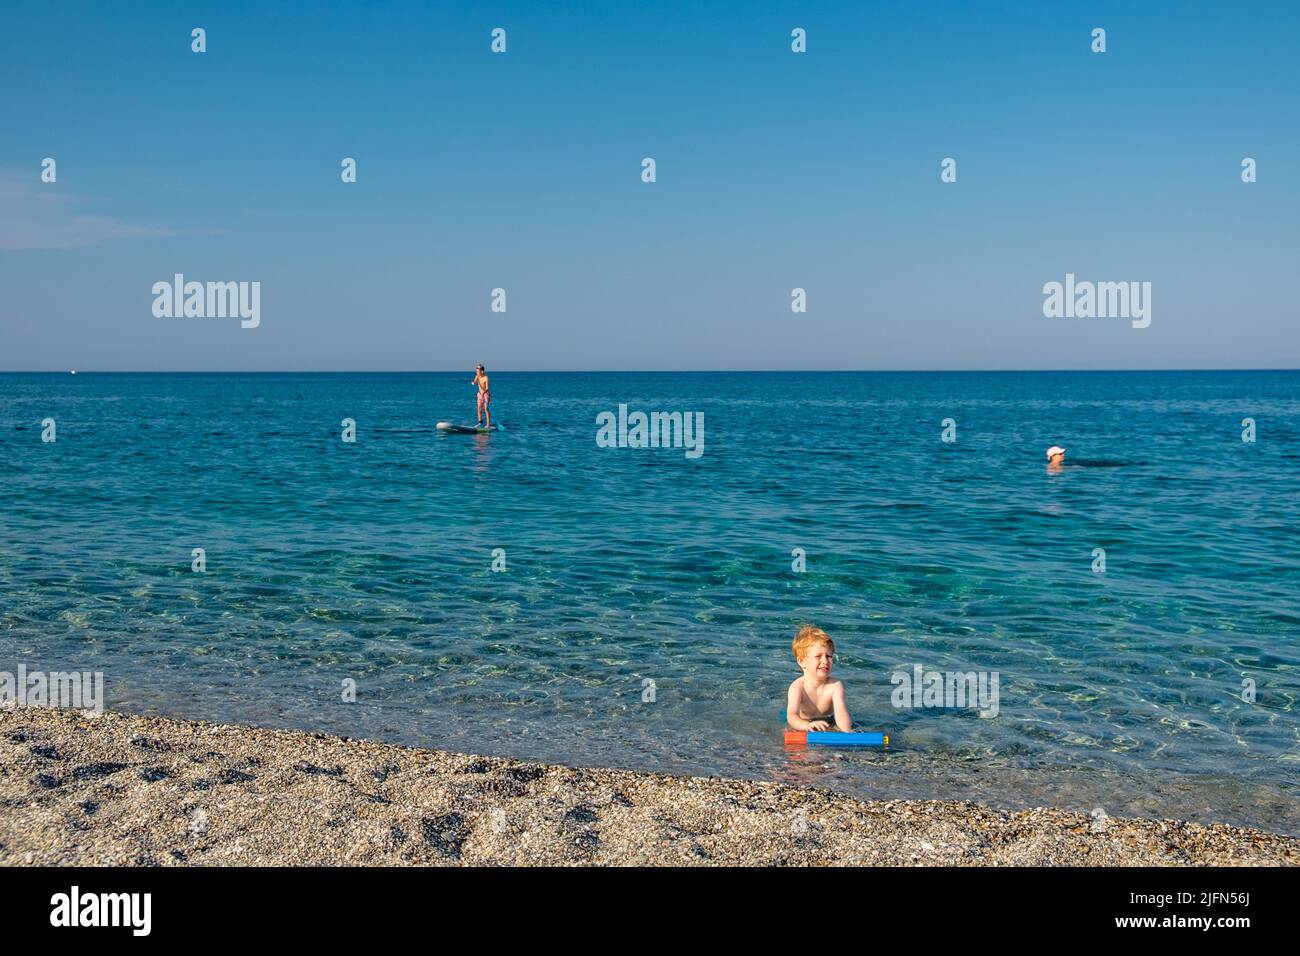 Cute little boy with blond hair playing in the sea with his water gun while other people swimming and stand up paddleboard Stock Photo